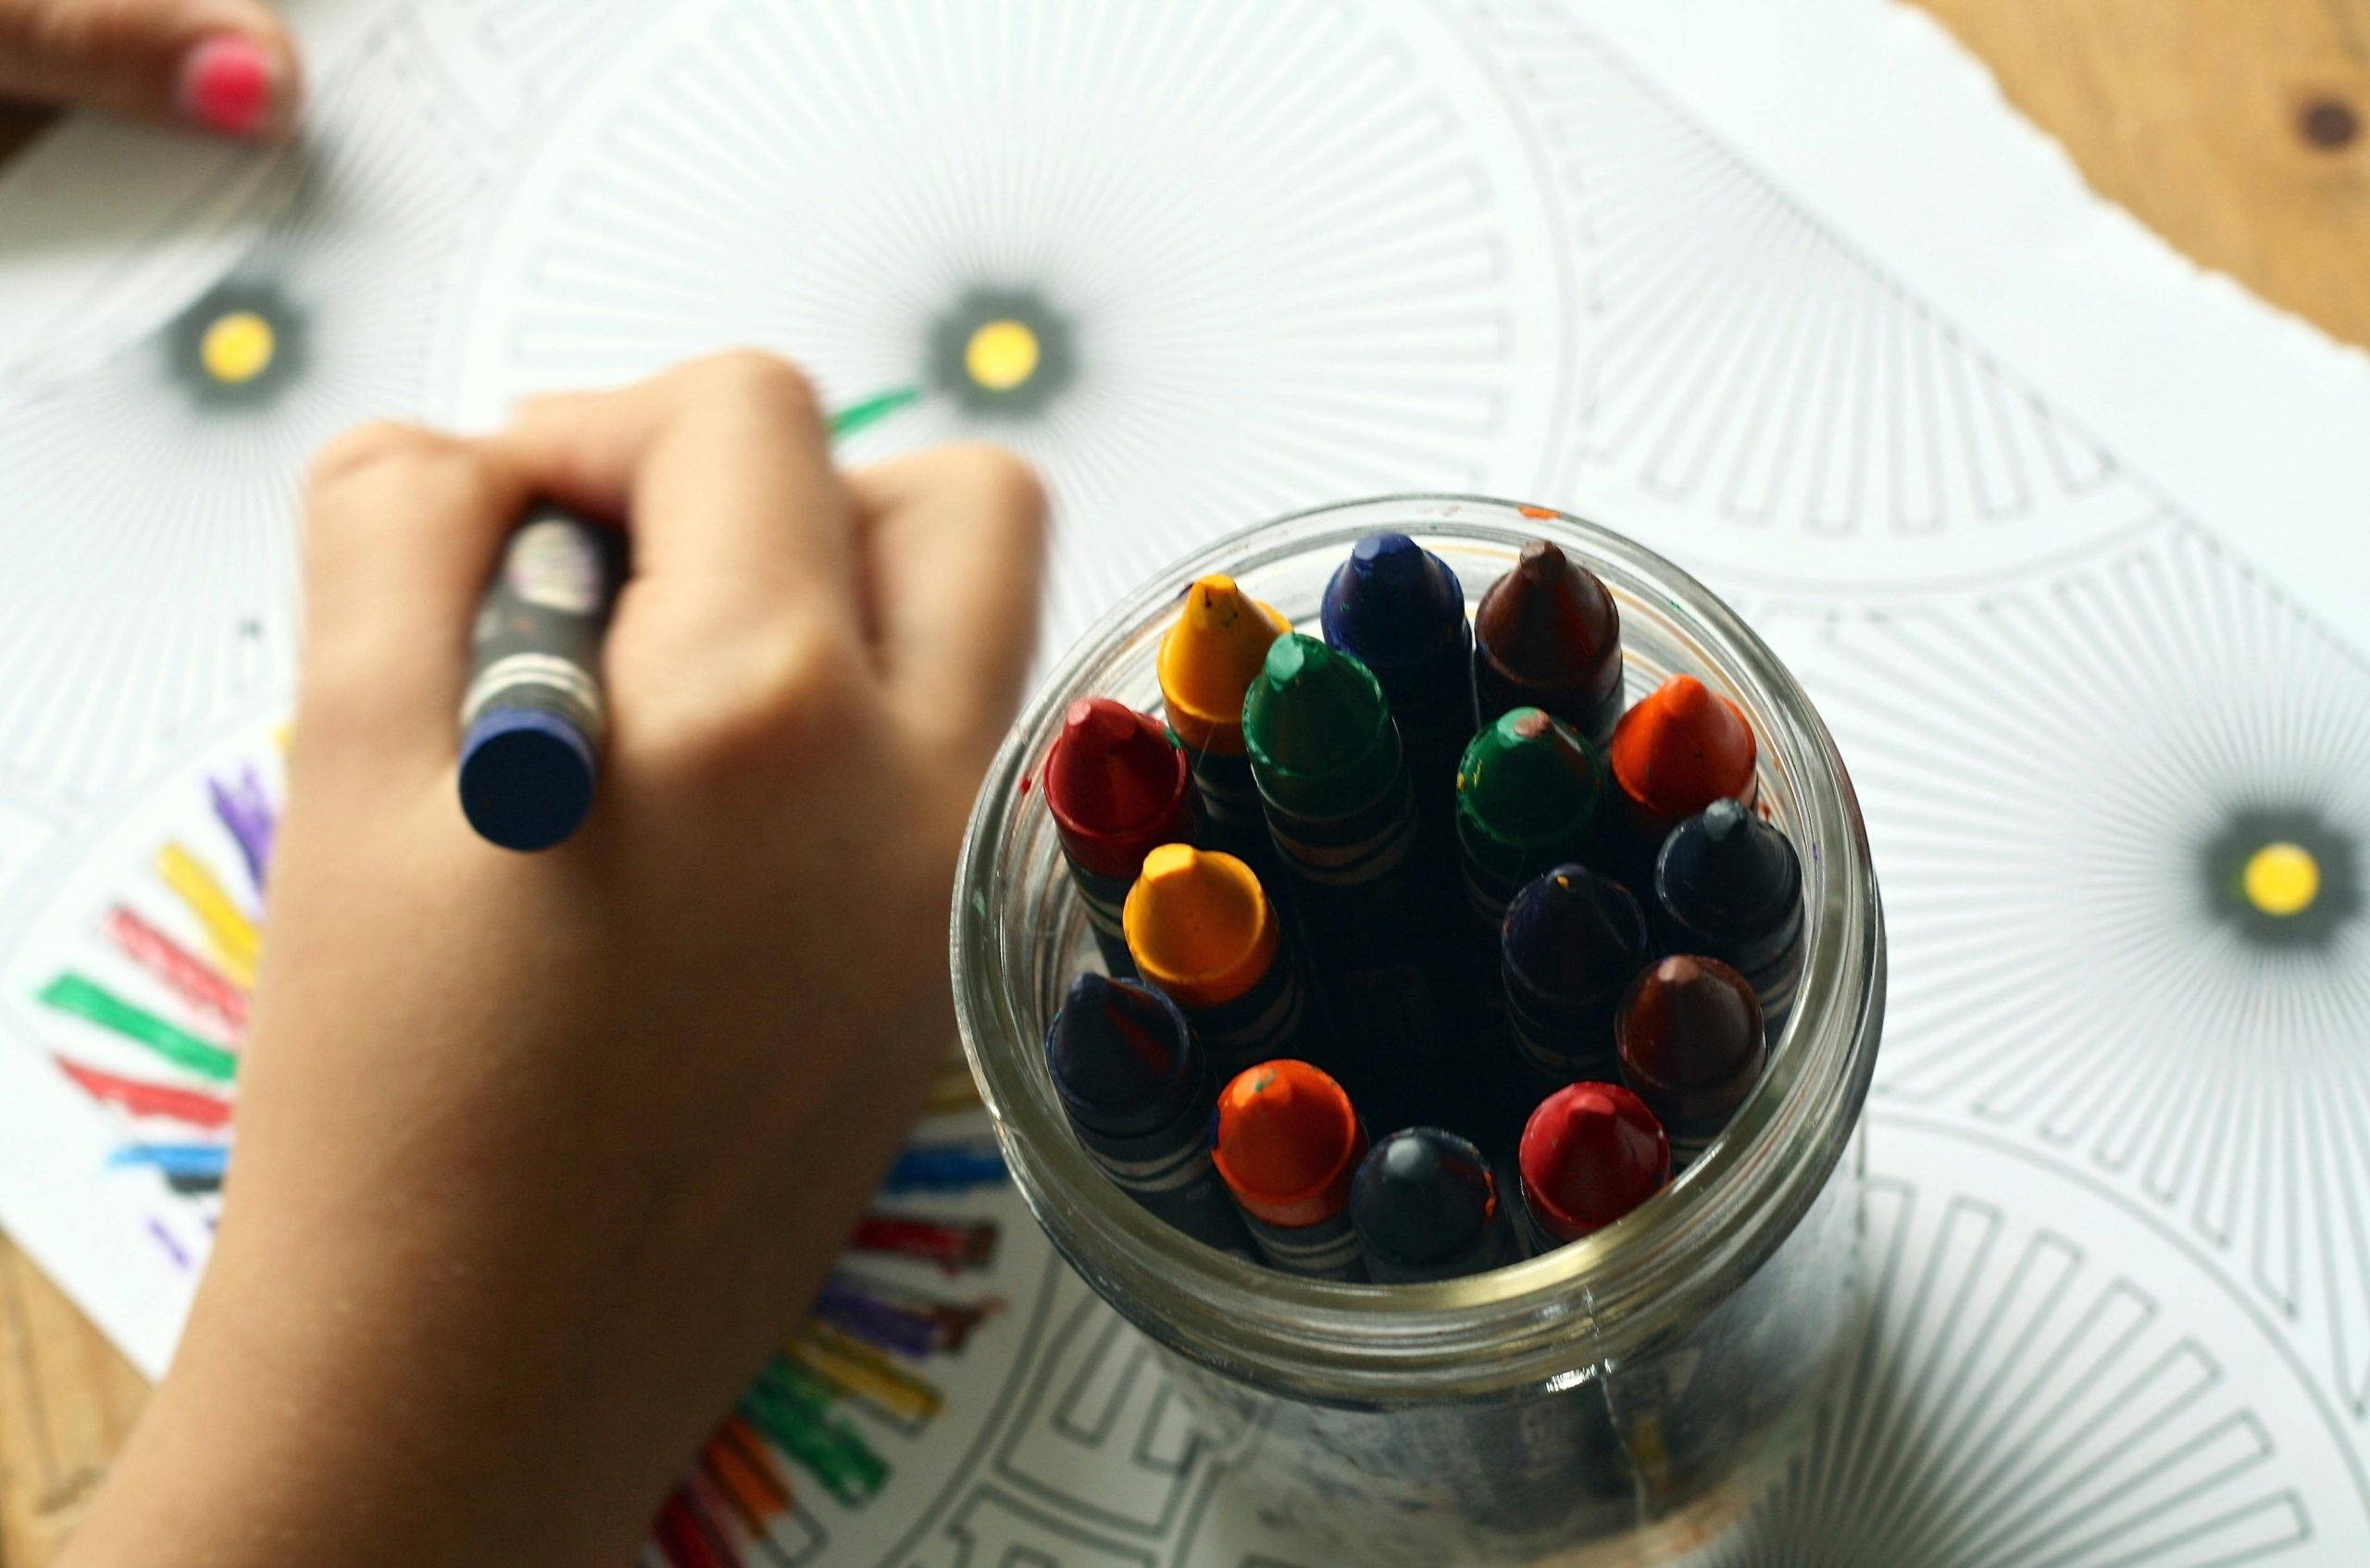 Photo by Pixabay: https://www.pexels.com/photo/person-coloring-art-with-crayons-159579/